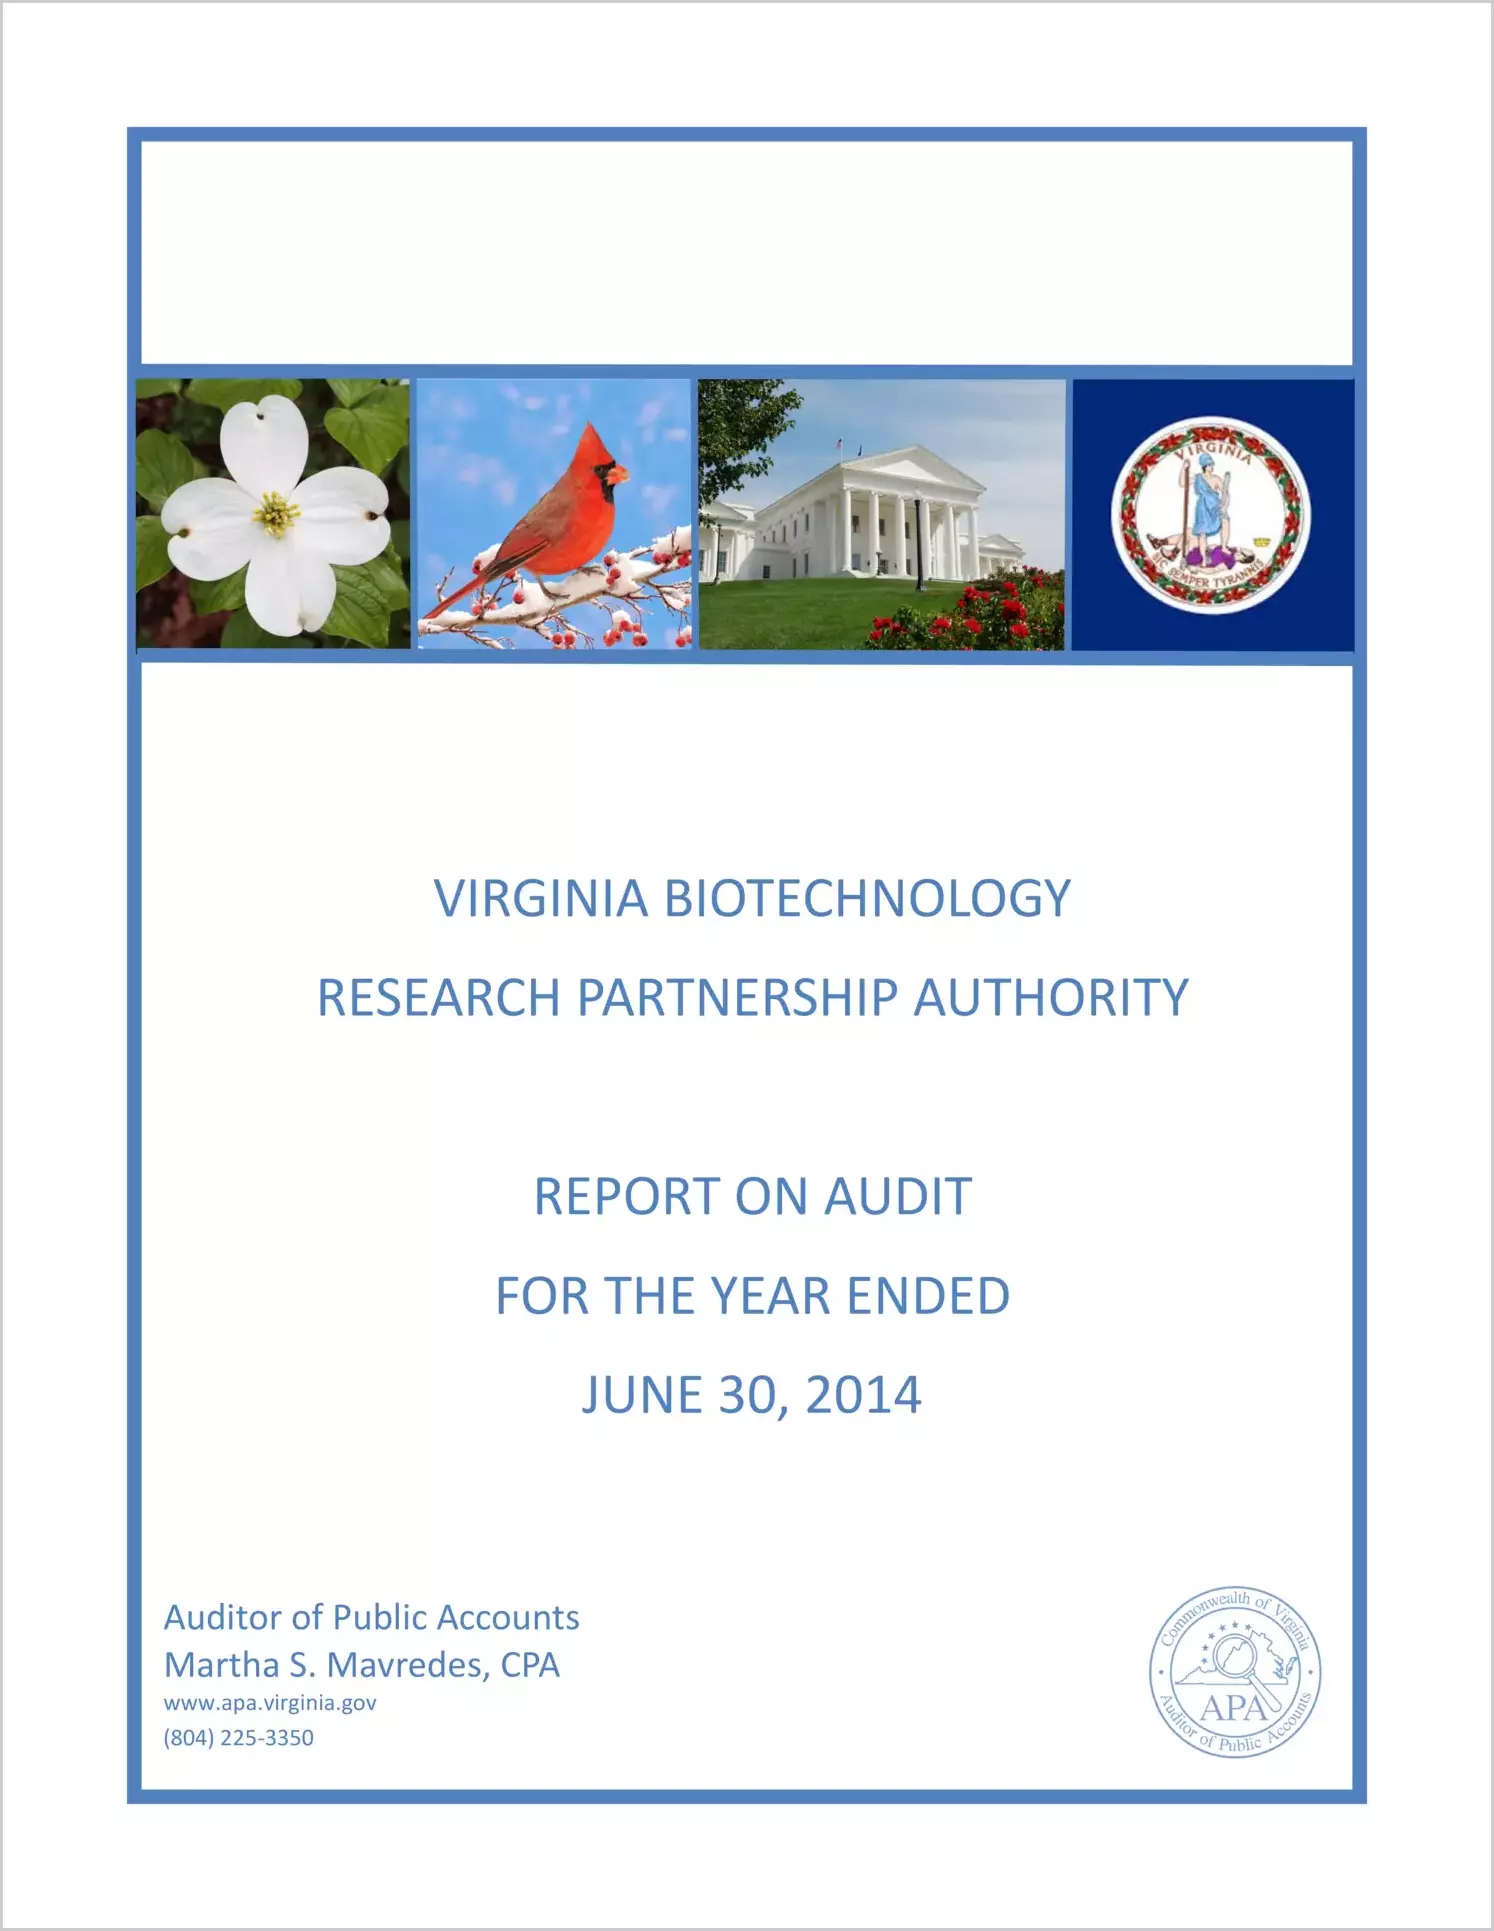 Virginia Biotechnology Research Partnership Authority for the year ended June 30, 2014